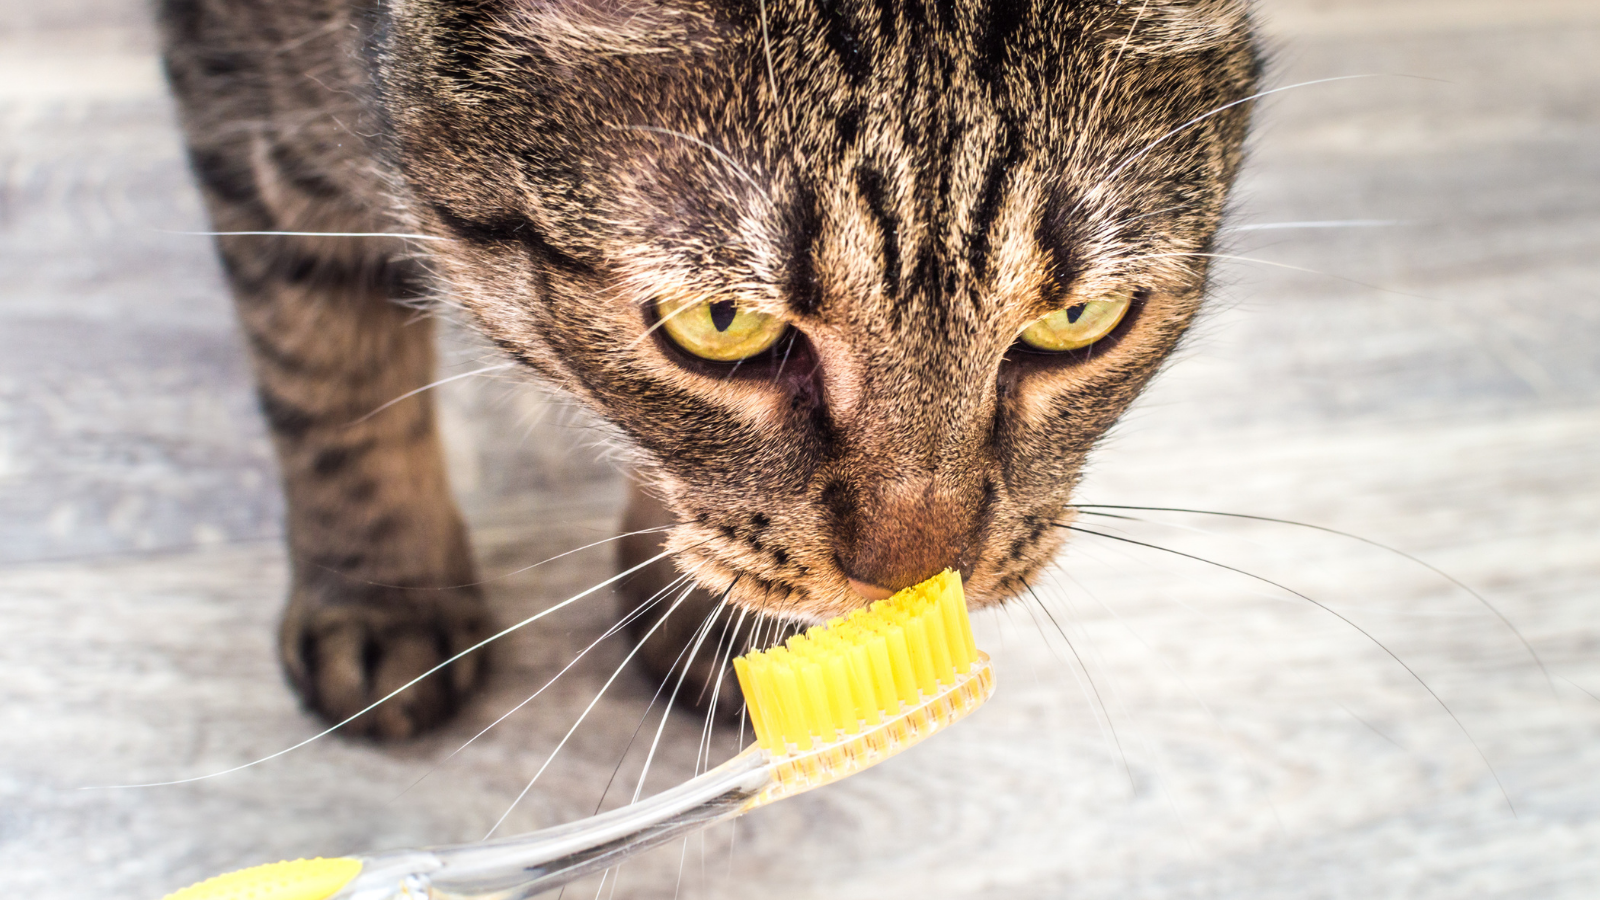 Cat and wet toothbrush